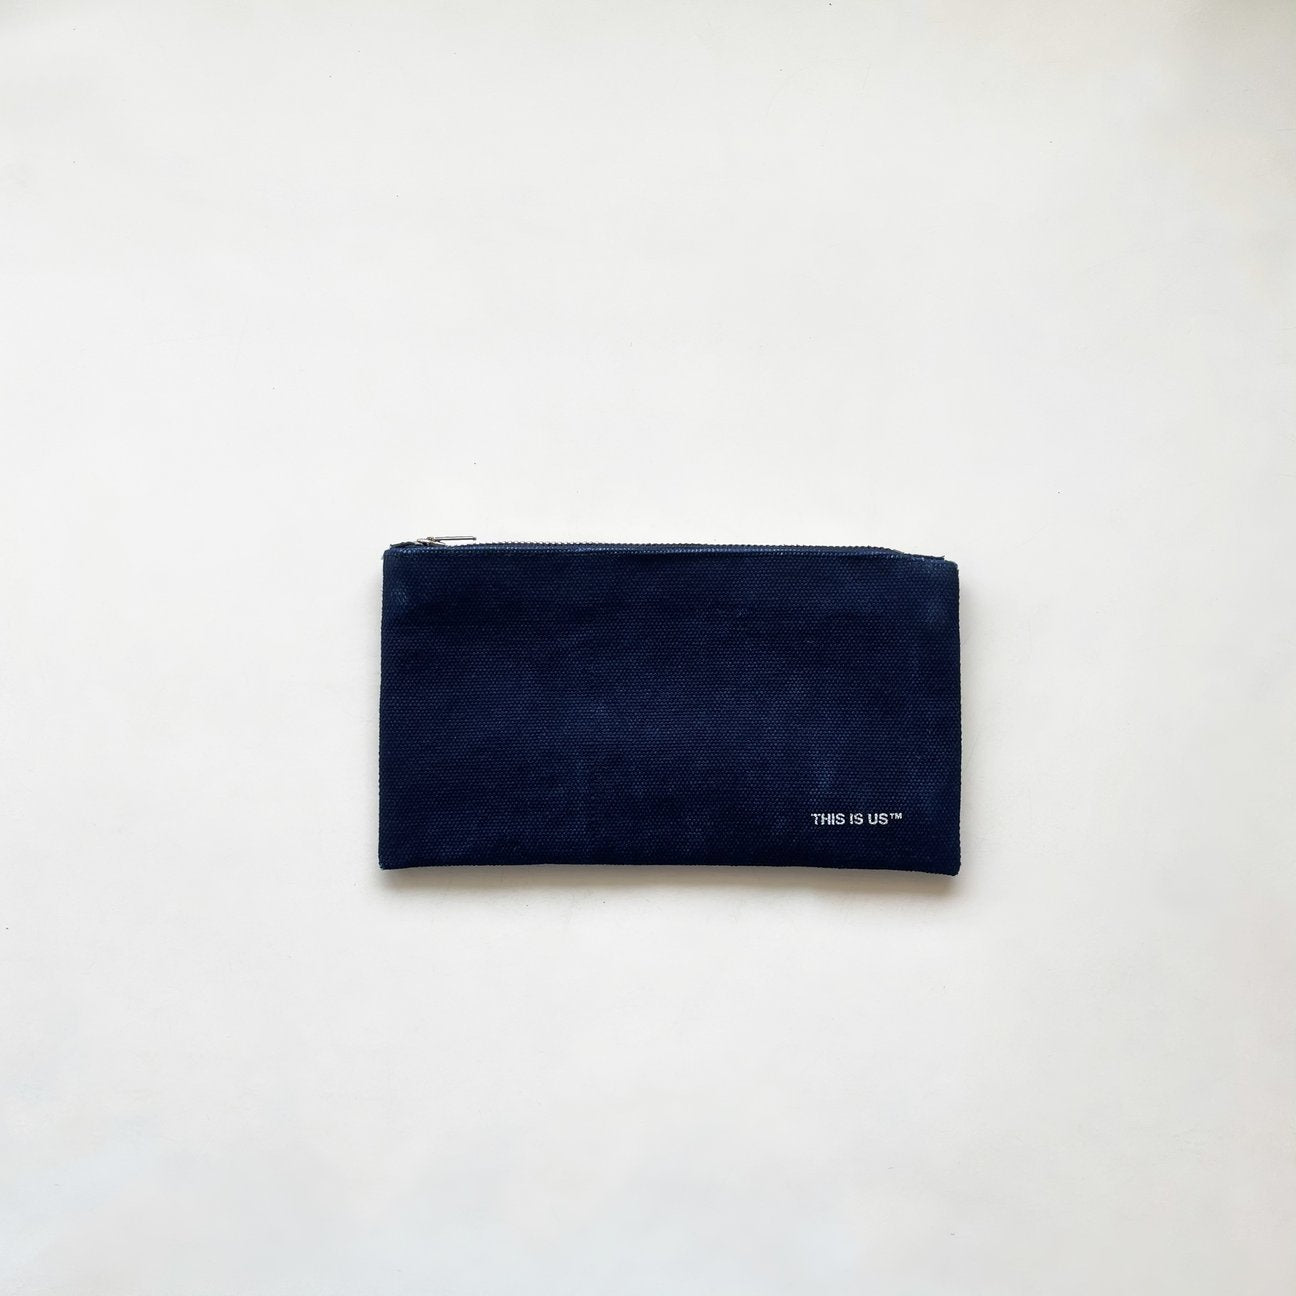 Made in Canvas Pencil Case